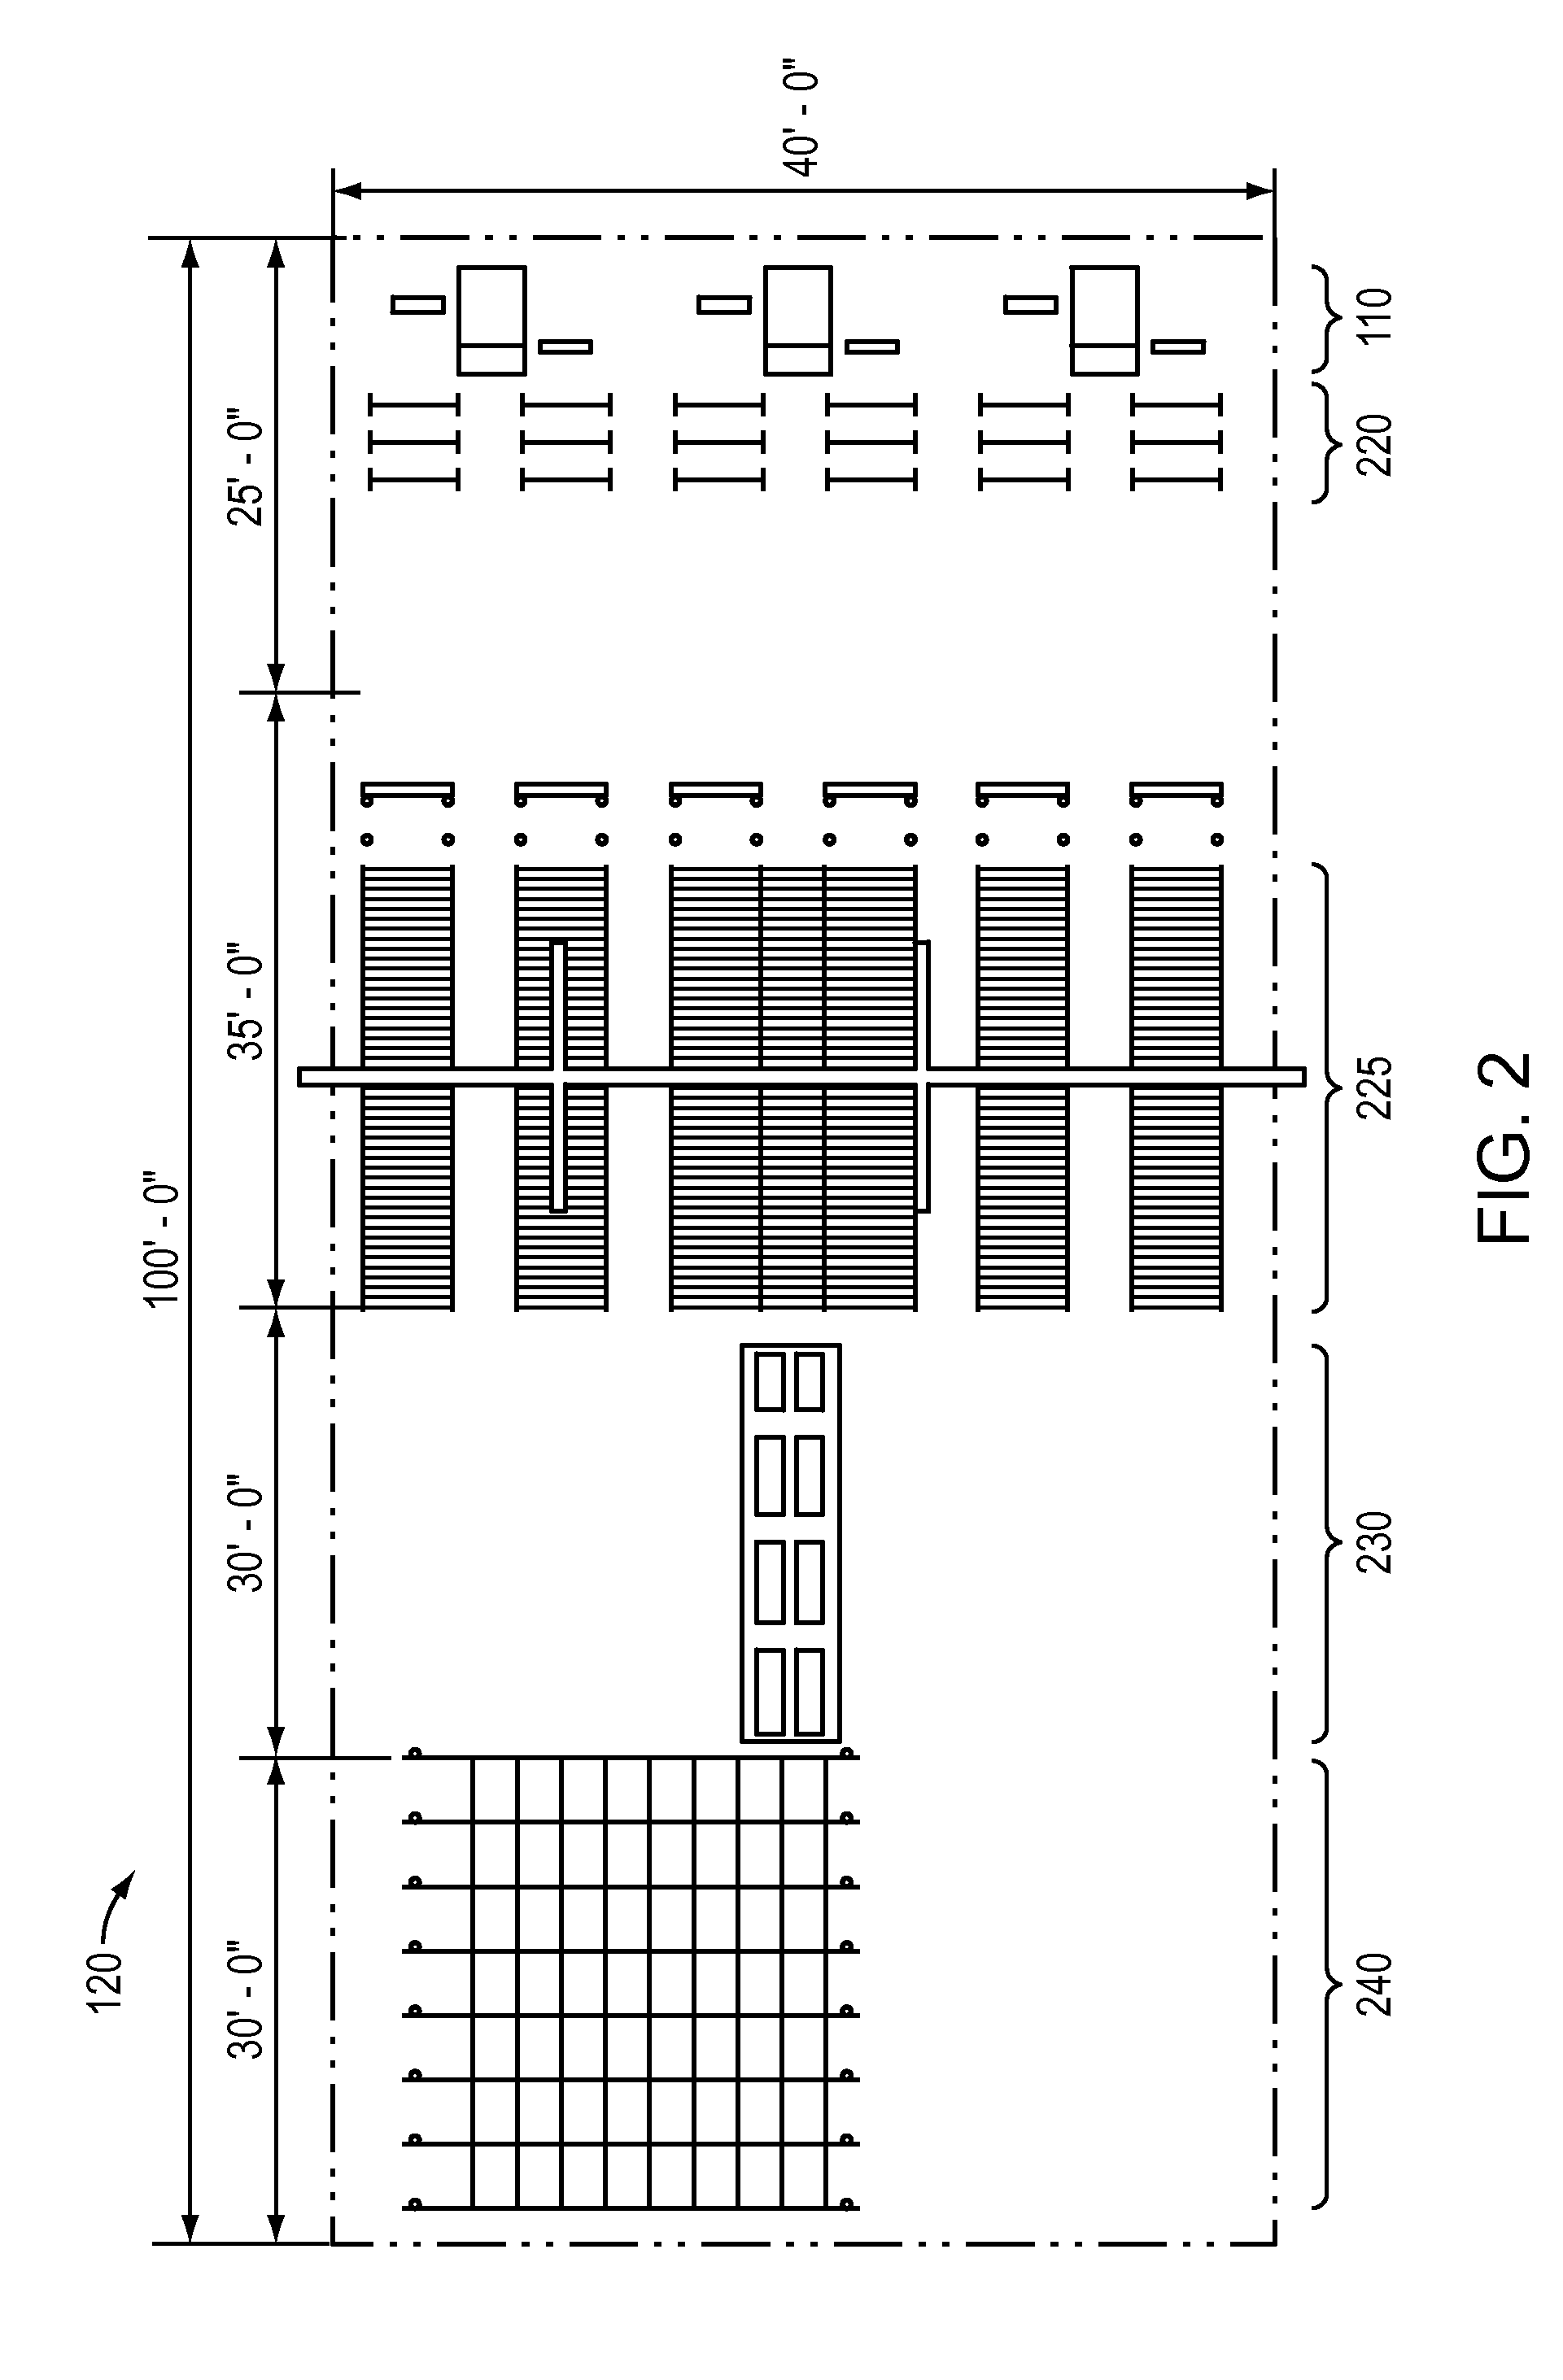 Information technology process for prefabricated building panel assembly